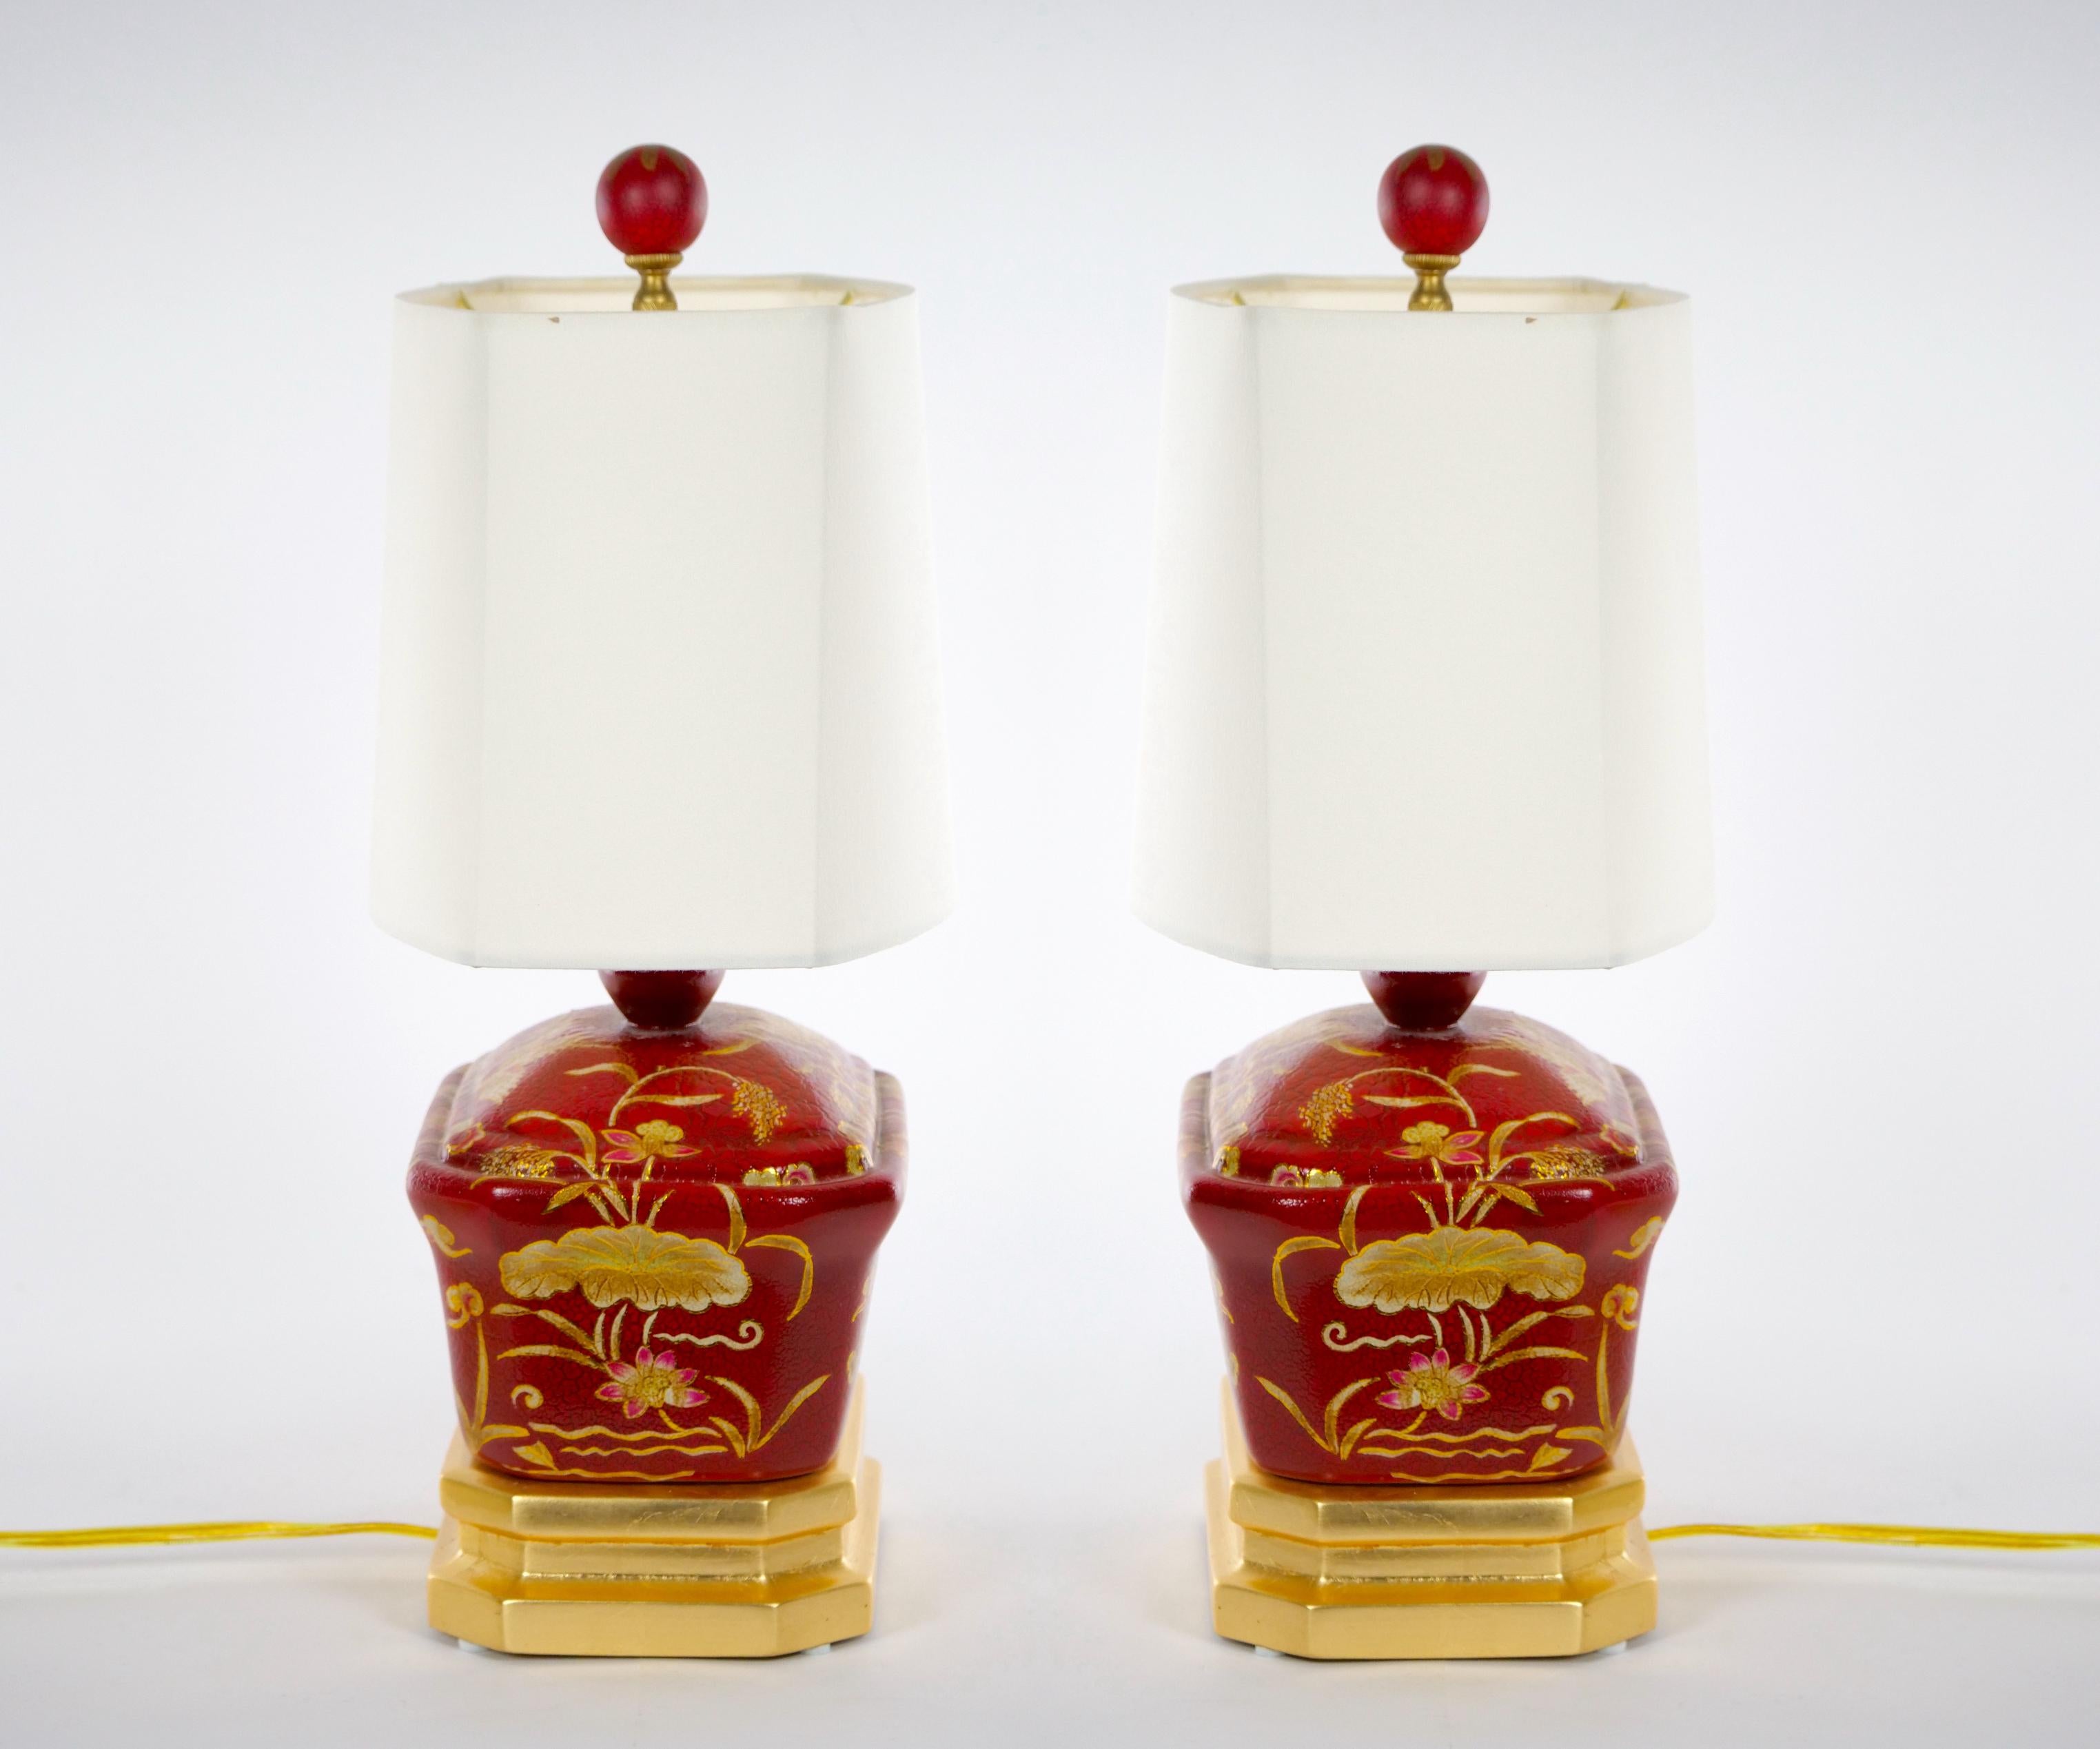 Beautifully hand painted and decorated red Lacquered chinoiserie scene details pair of small table lamp. Each lamp features a red lacquered decorated floral chinoiserie scene resting on an oval gilt wood base. Each lamp is in great working condition